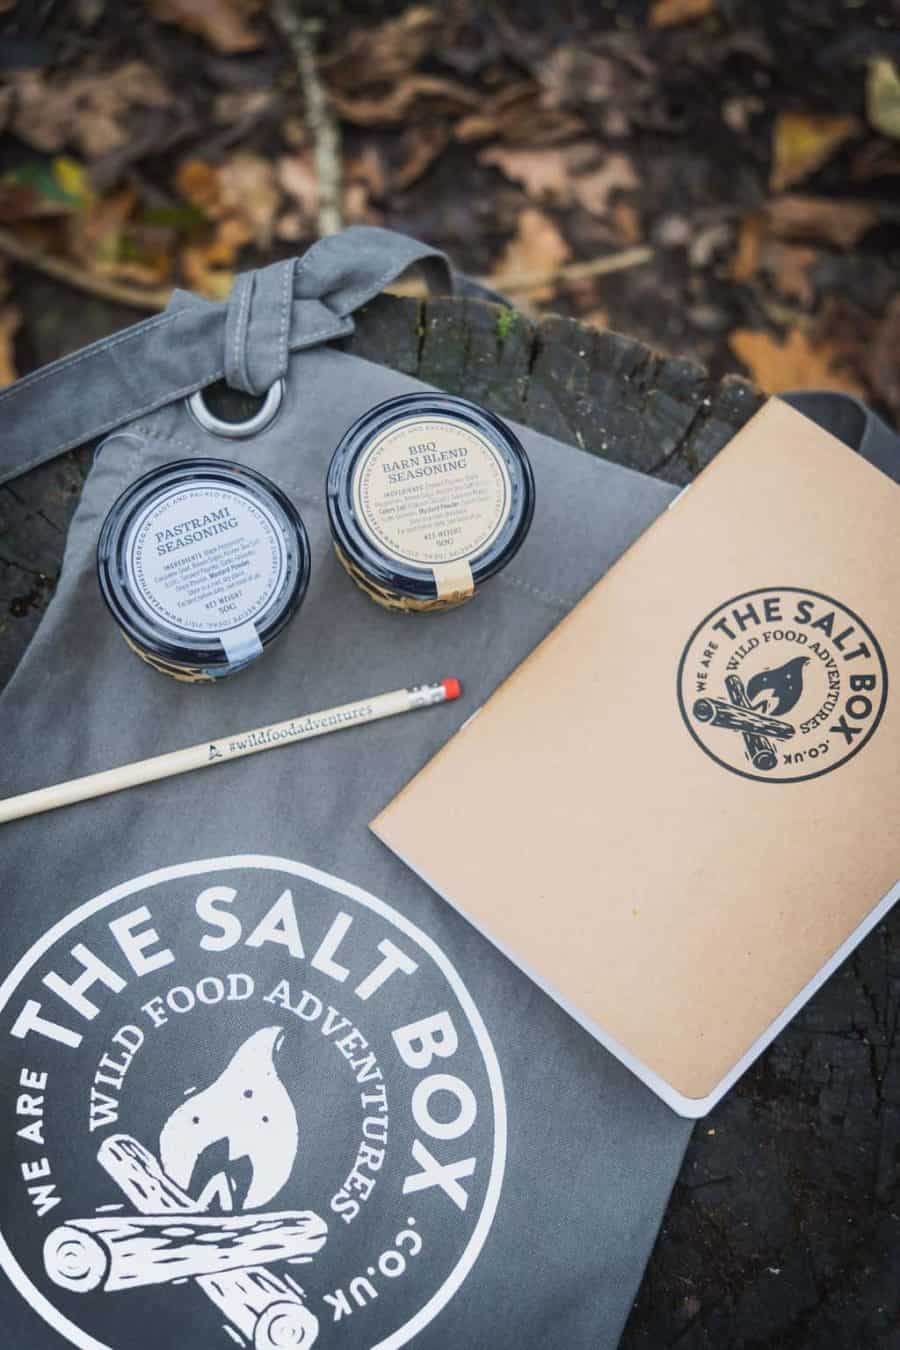 Salt Box Branded Products